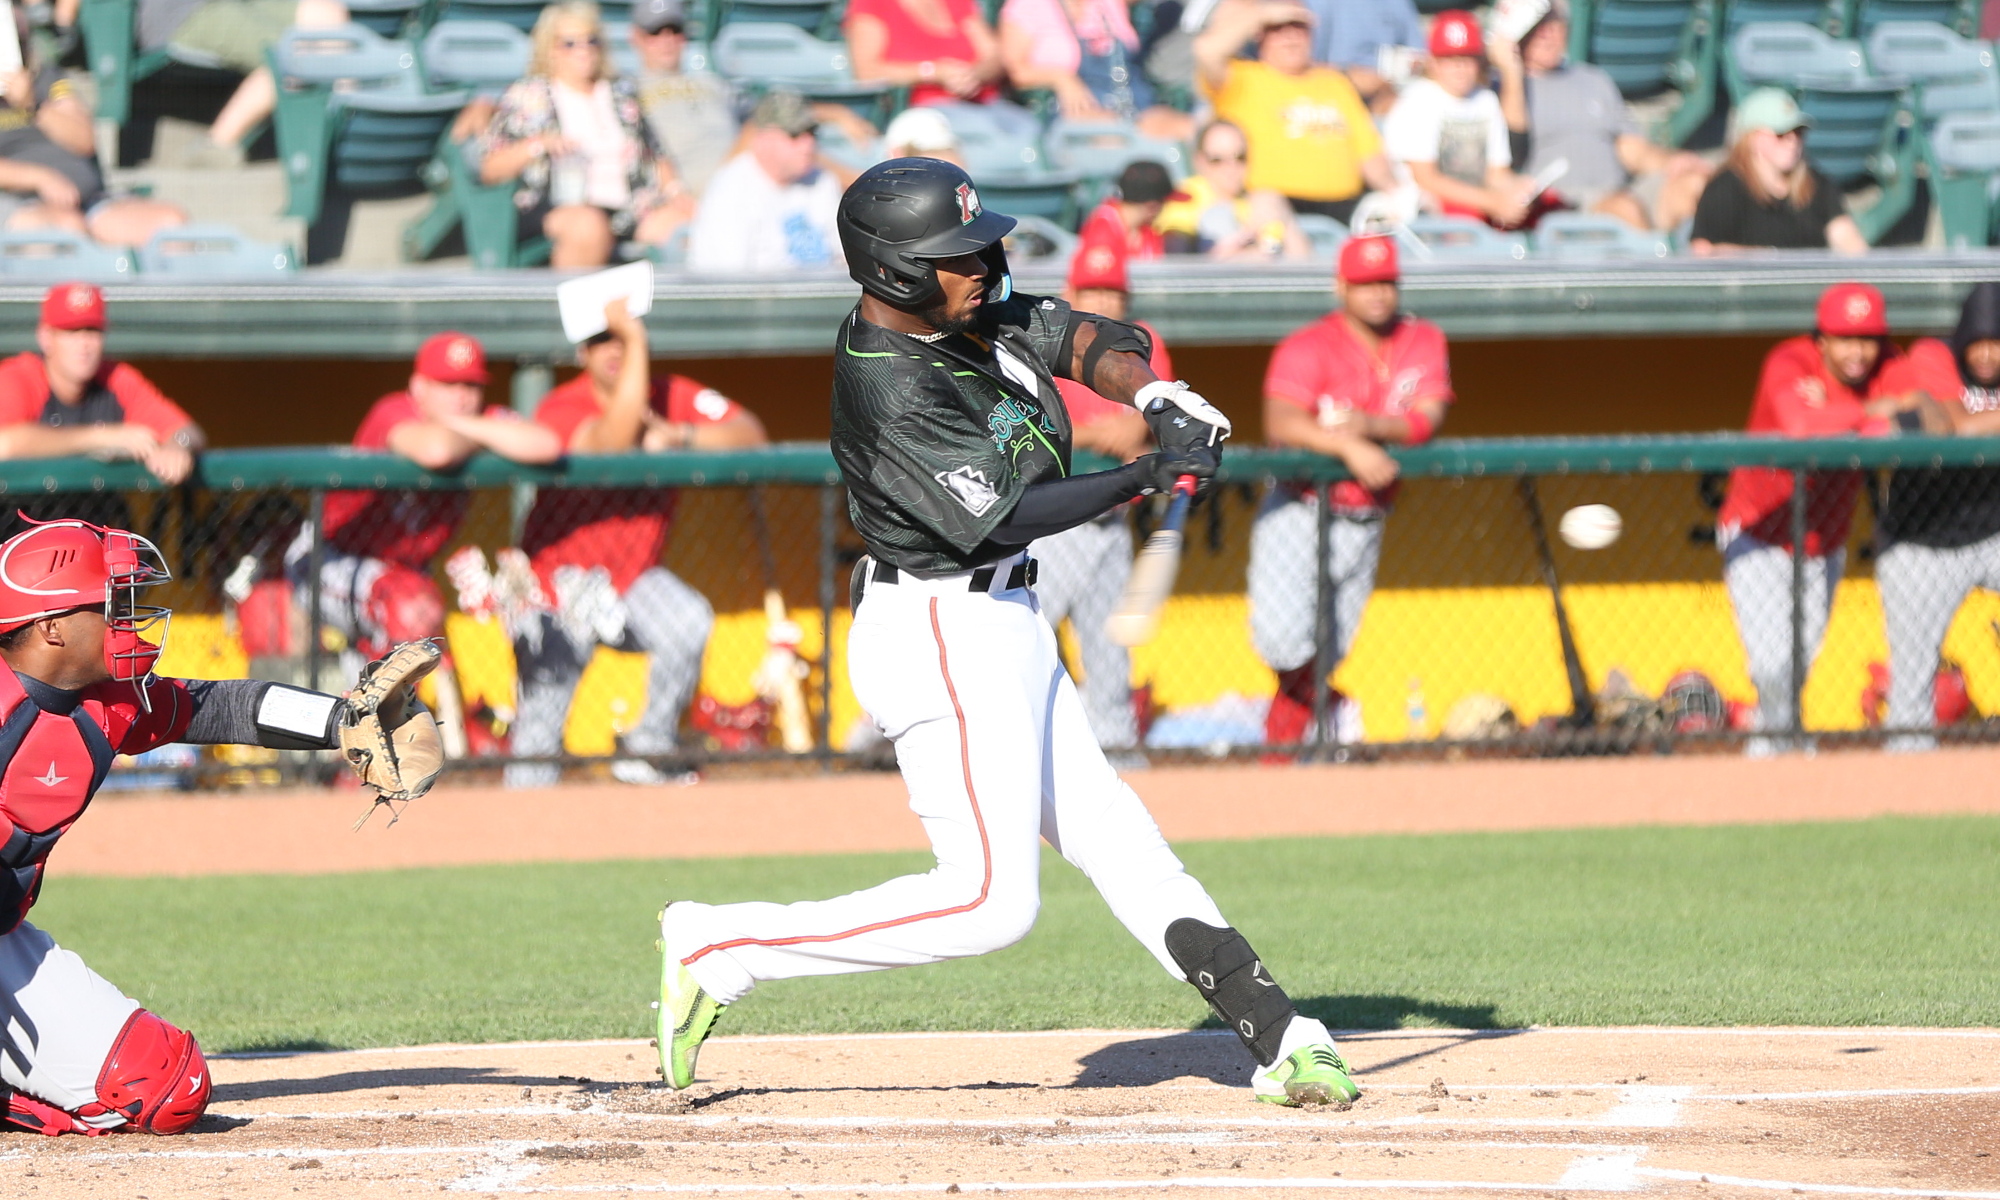 Winter Leagues: Back-to-Back Multi-Hit Games for Liover Peguero